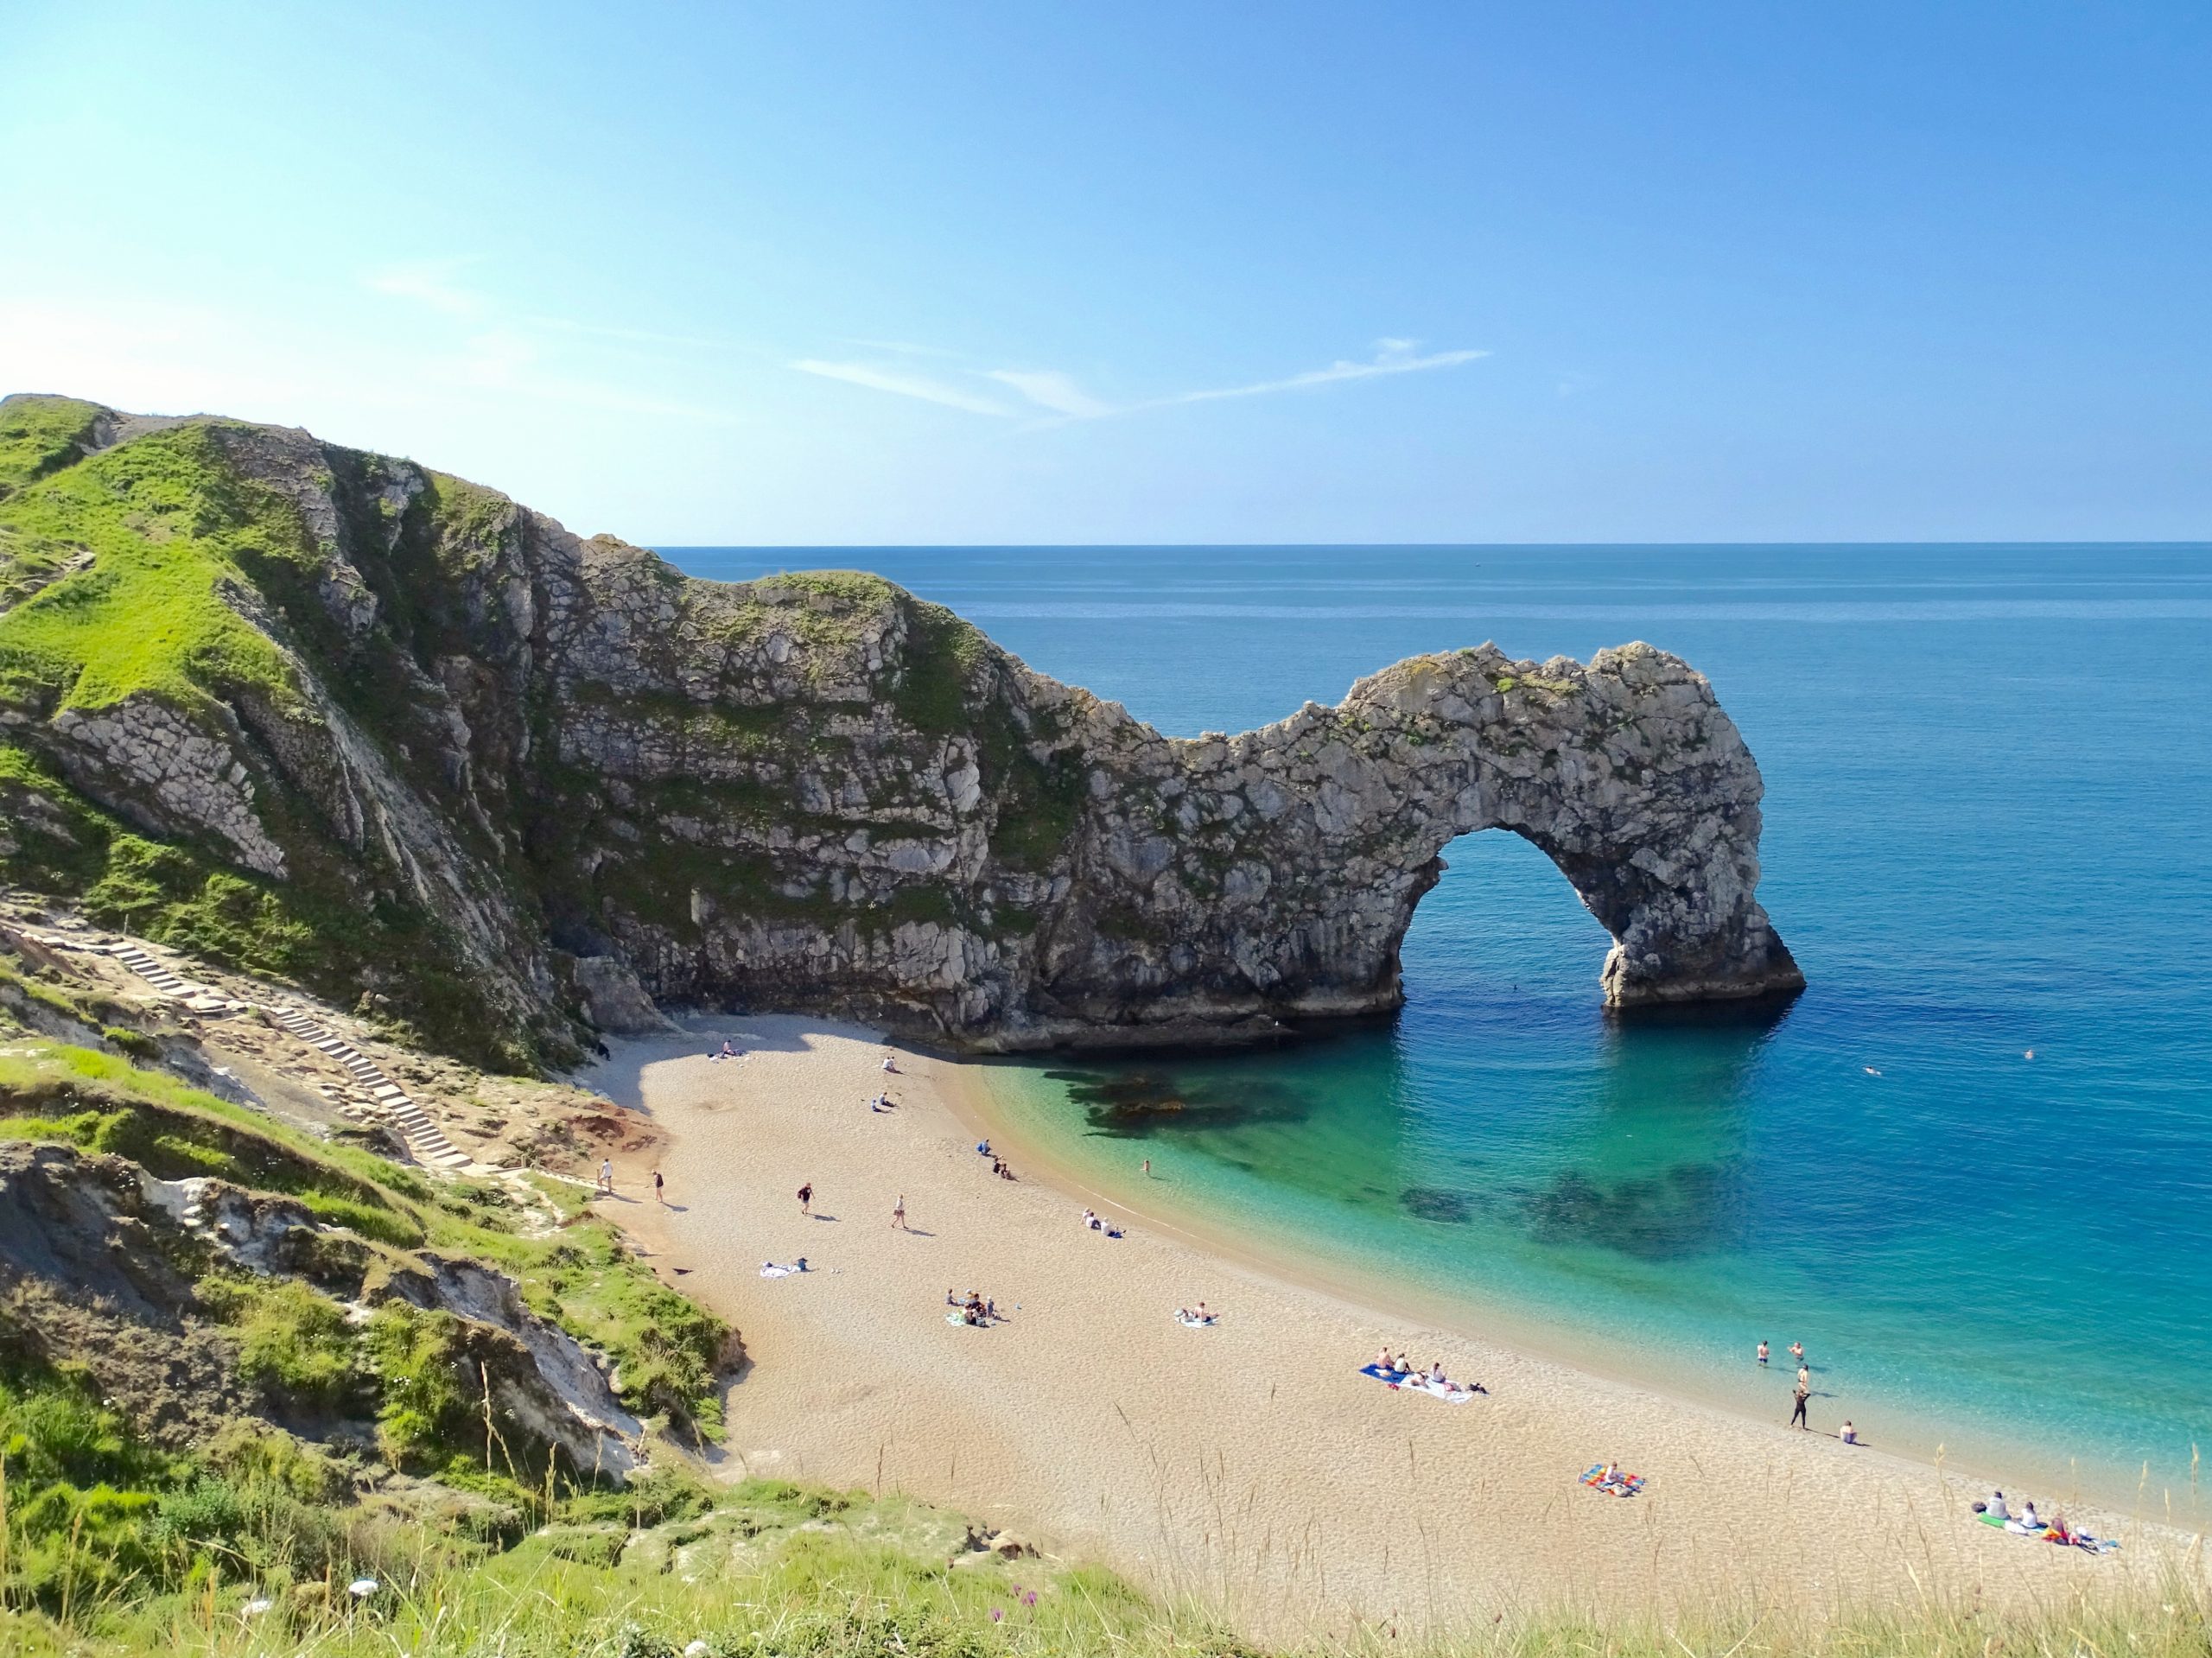 Durdle Door in Dorset on a clear day with a few people on the beach enjoying the sun.